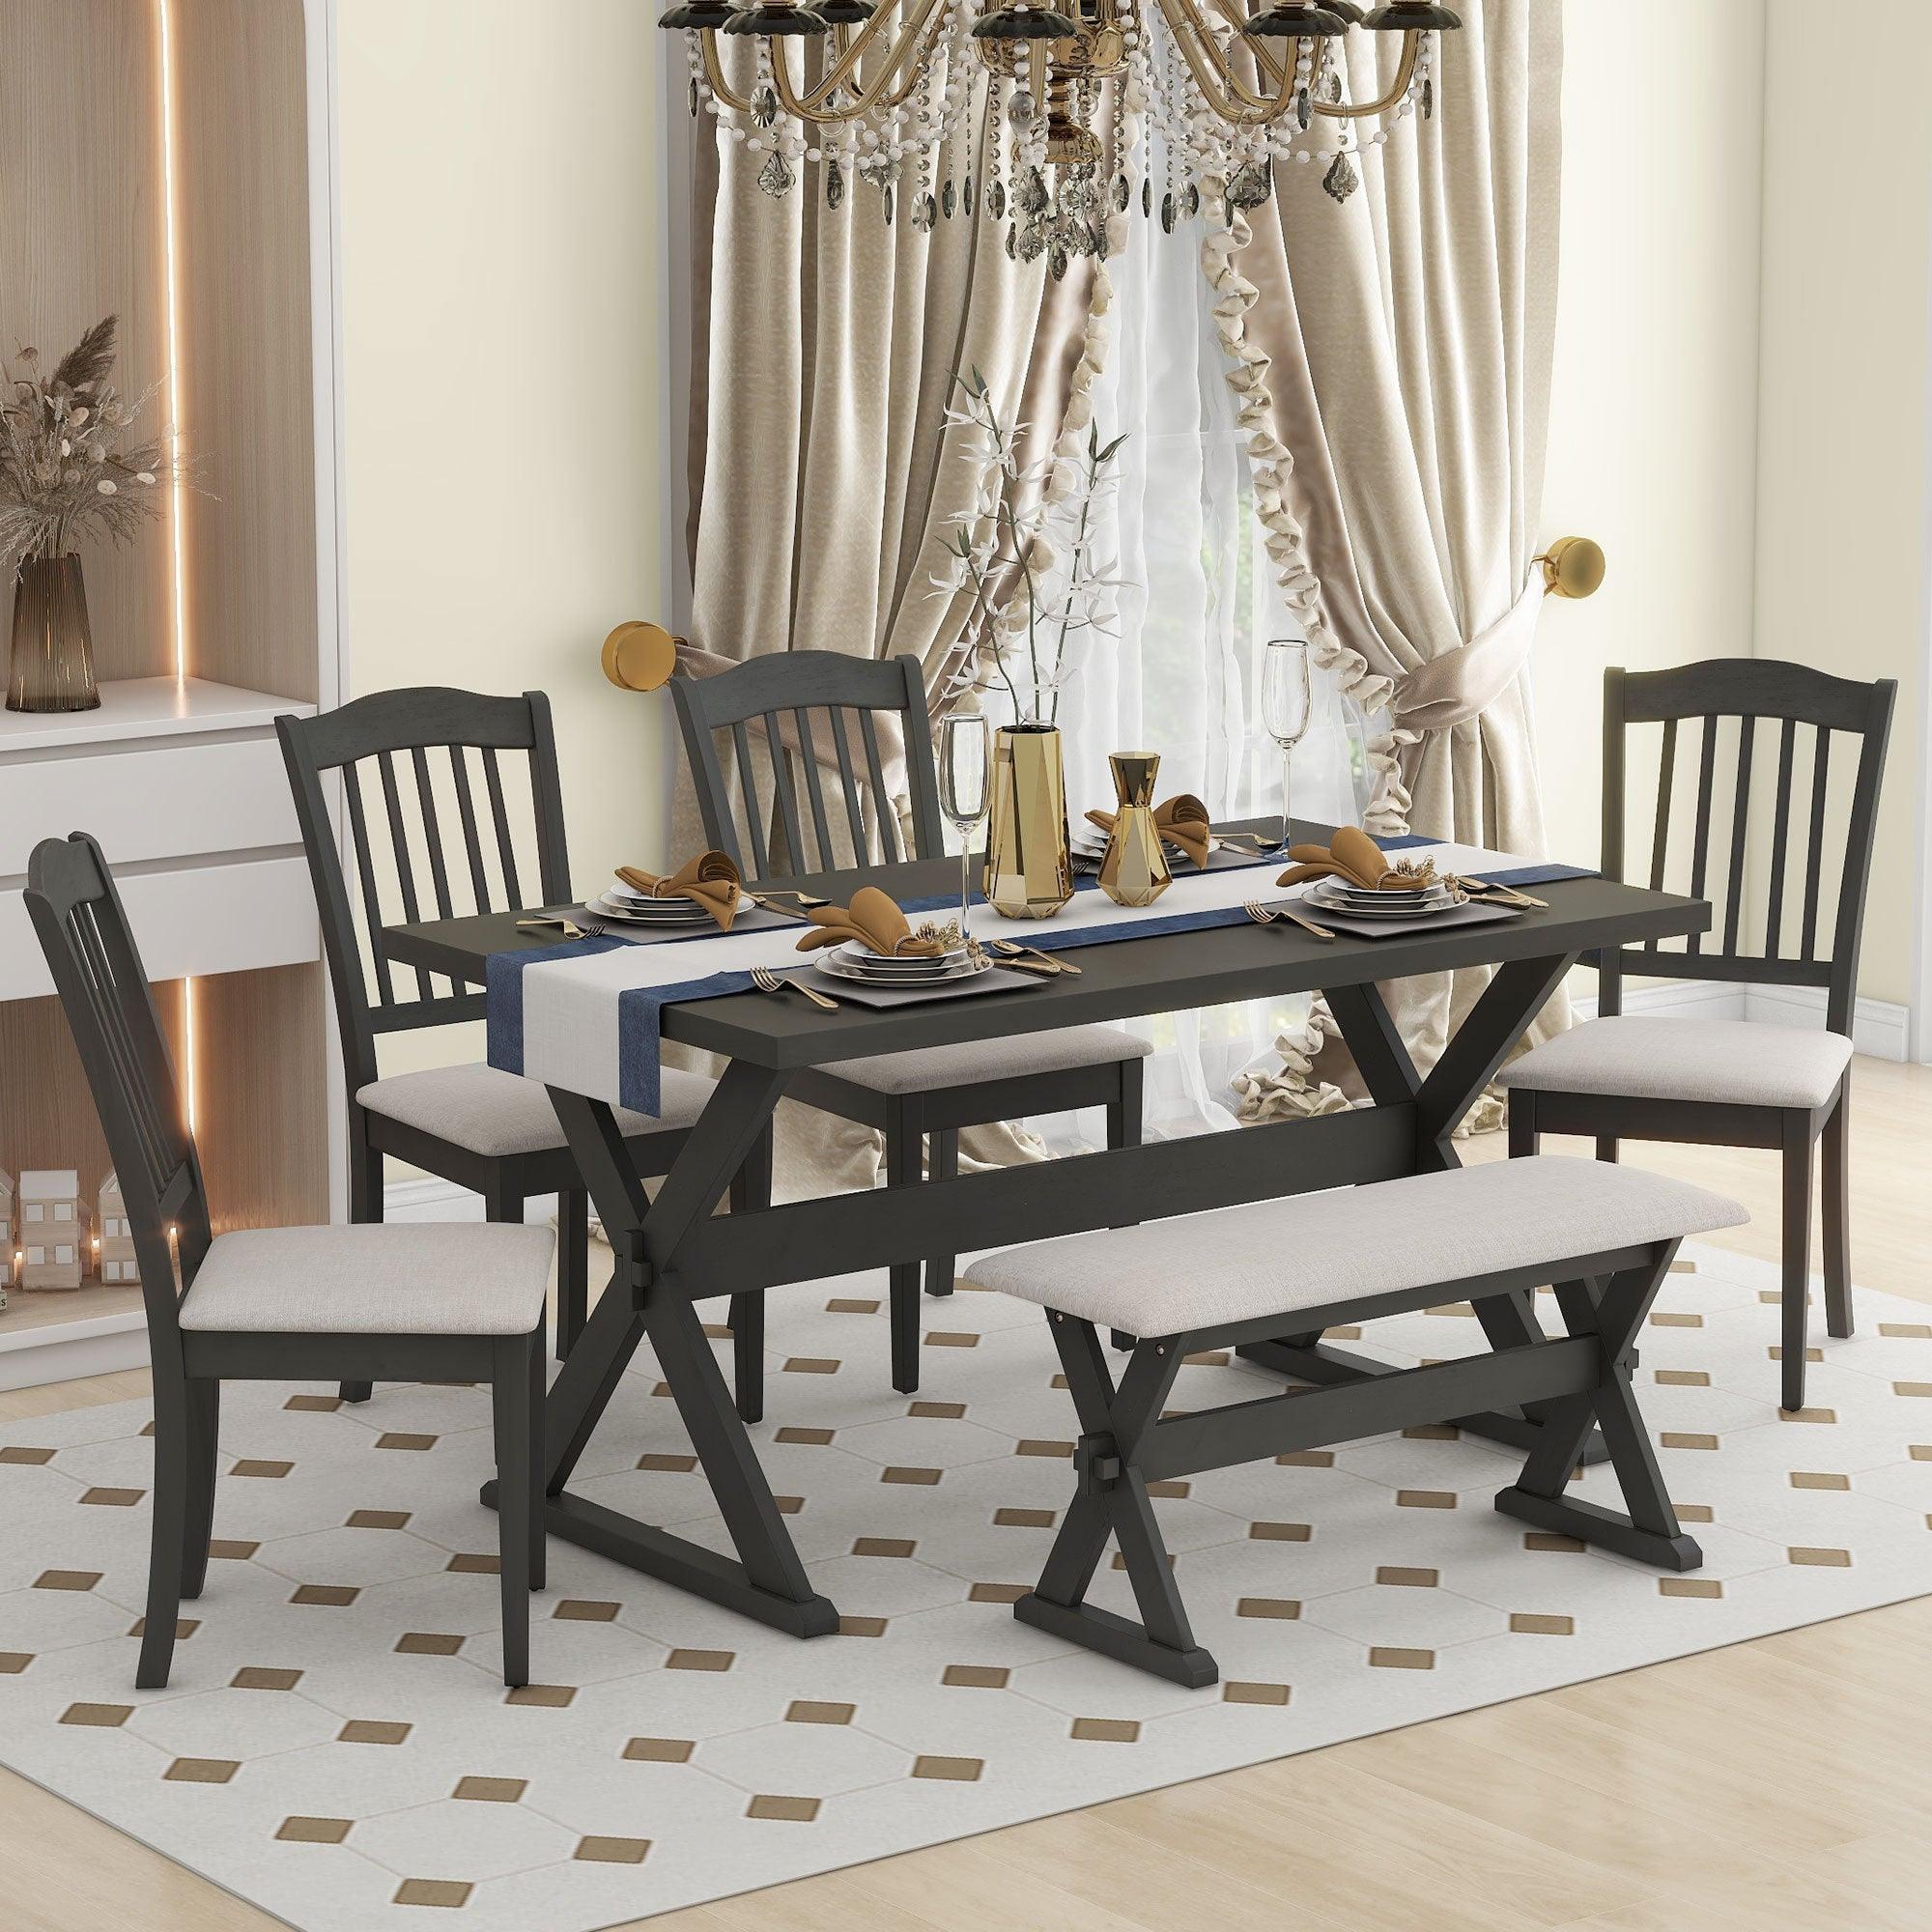 6-Piece Rustic Dining Set, Rectangular Trestle Table And 4 Upholstered Chairs & Bench For Dining Room (Gray) LamCham